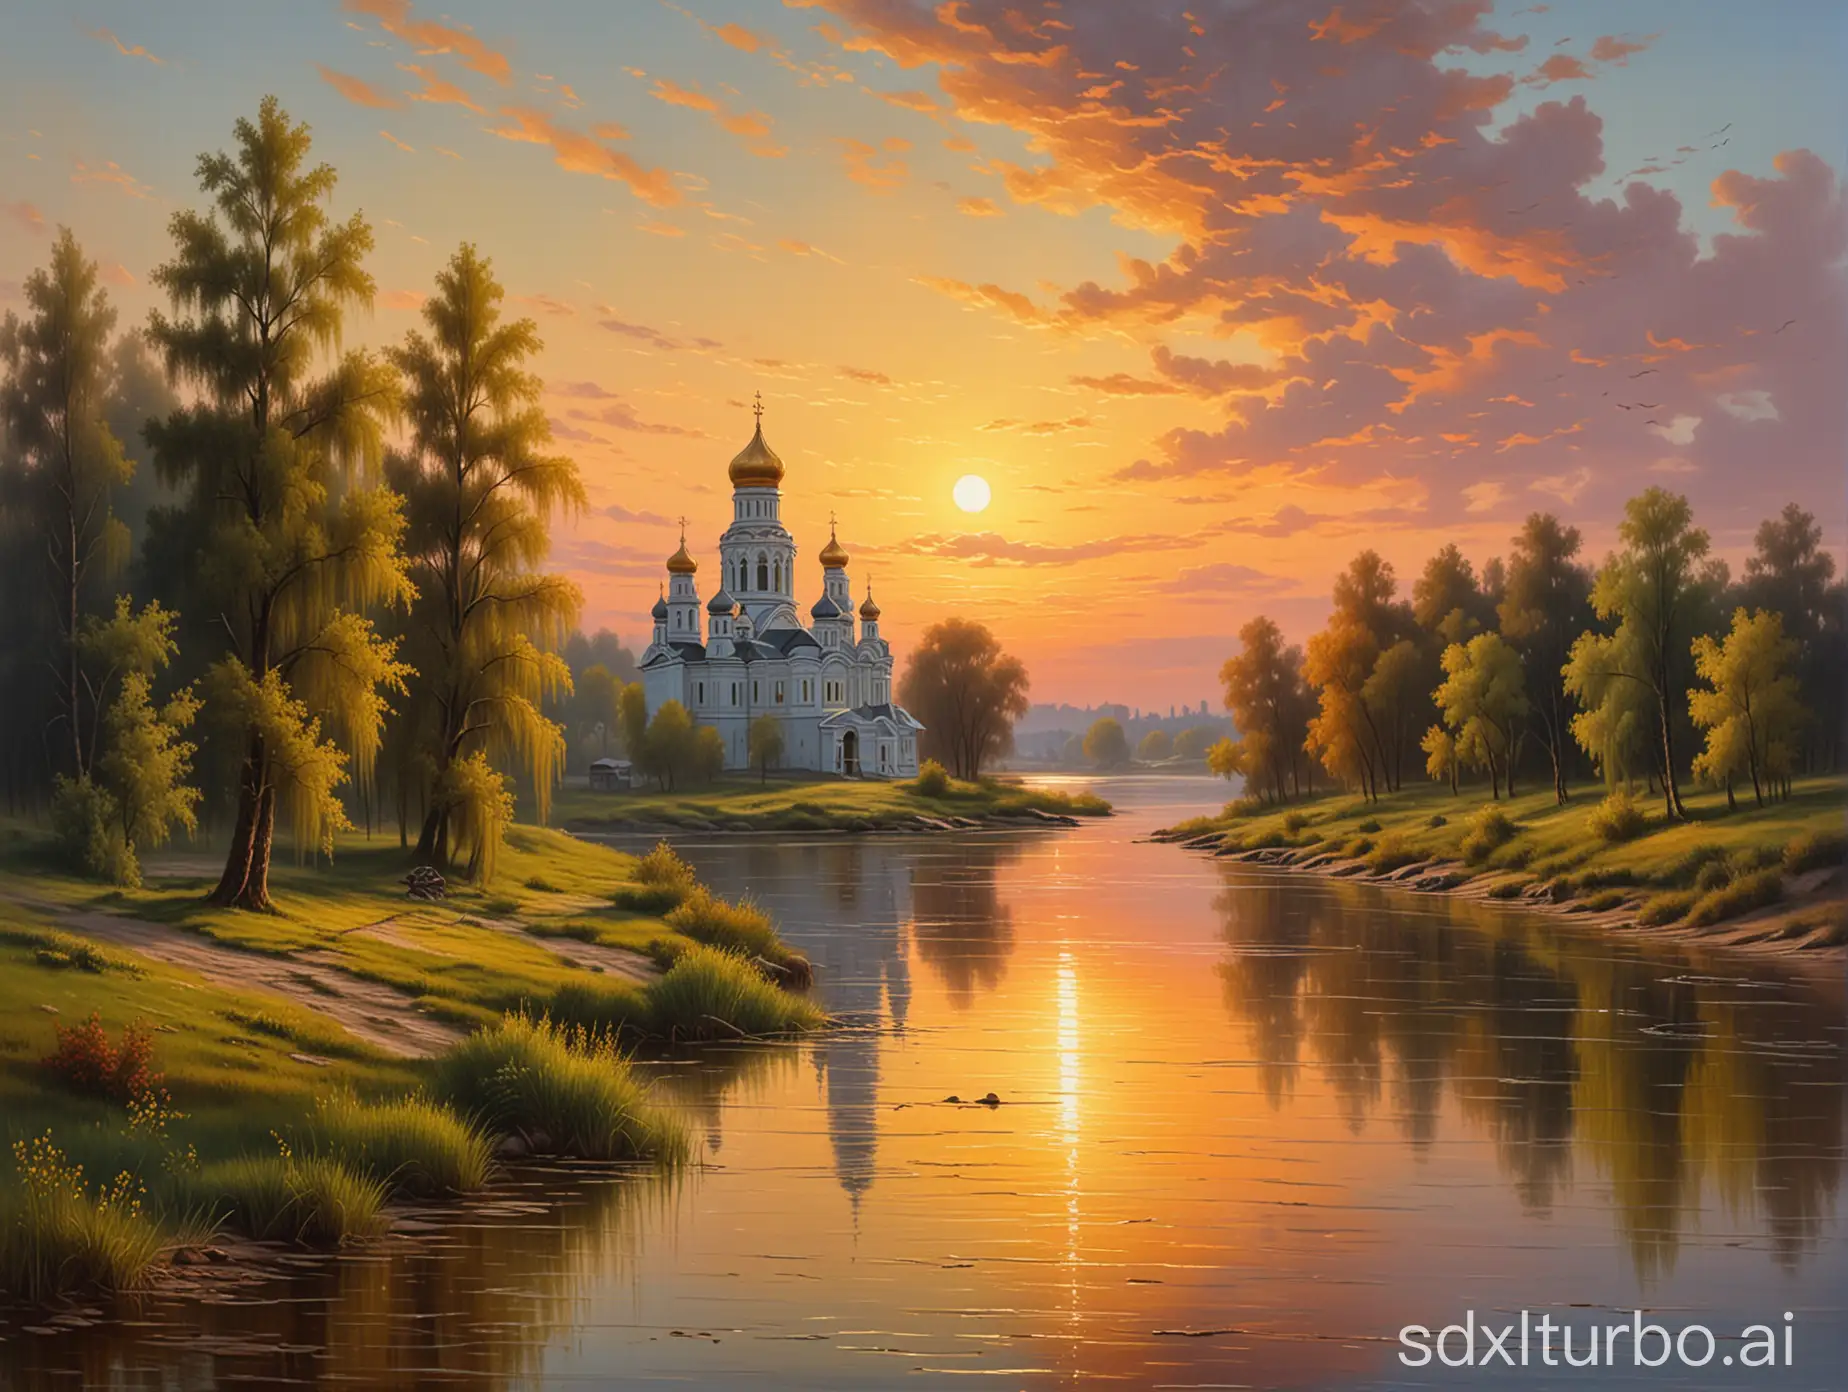 Eastern-Orthodox-Church-by-the-River-at-Sunset-Classical-Russian-Style-Oil-Painting